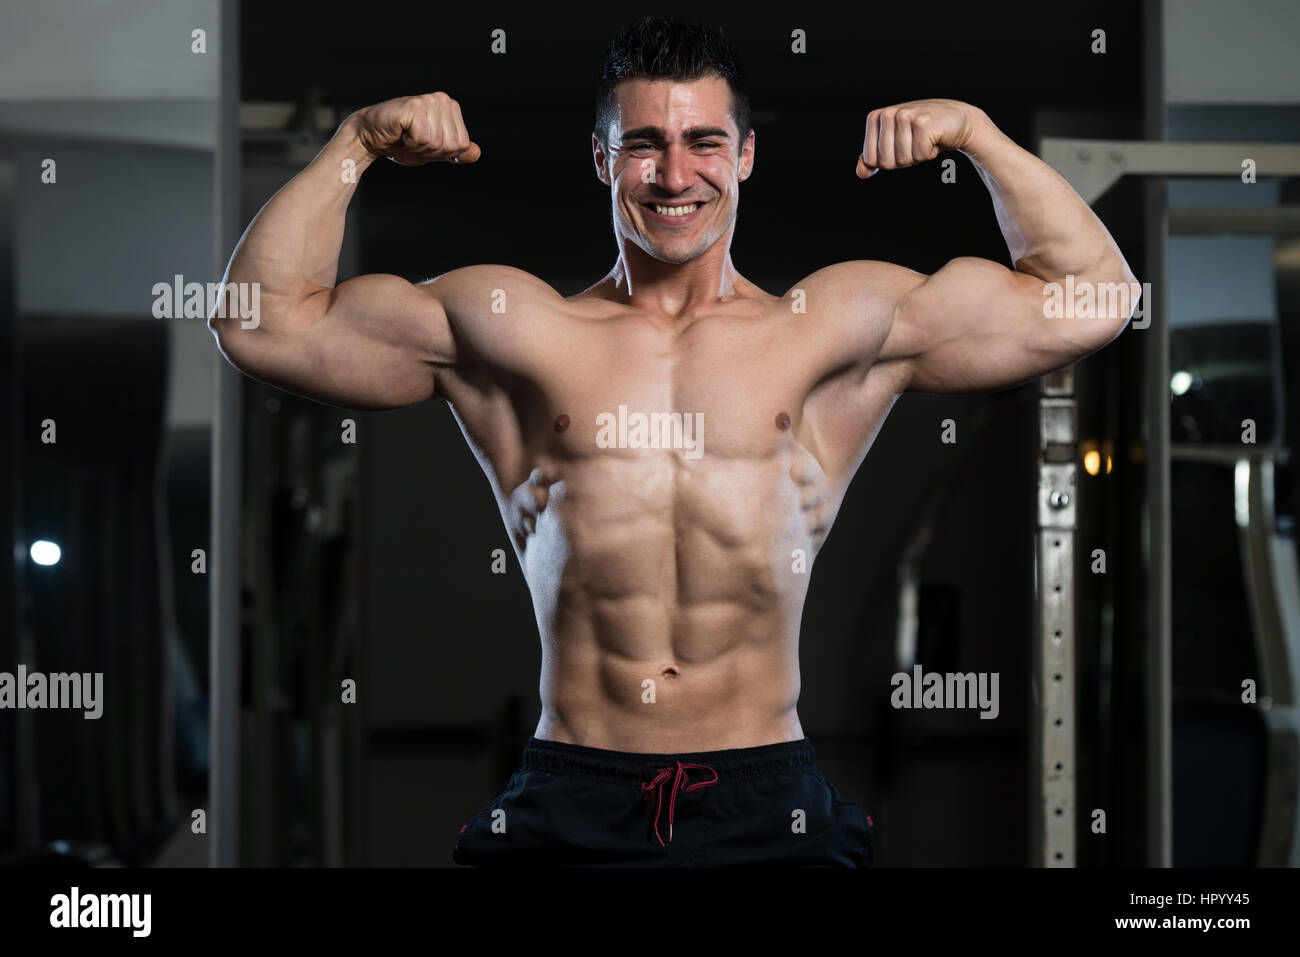 Portrait Of A Young Fit Man Showing Front Double Biceps Pose - Muscular  Athletic Bodybuilder Fitness Model Posing Stock Photo - Alamy